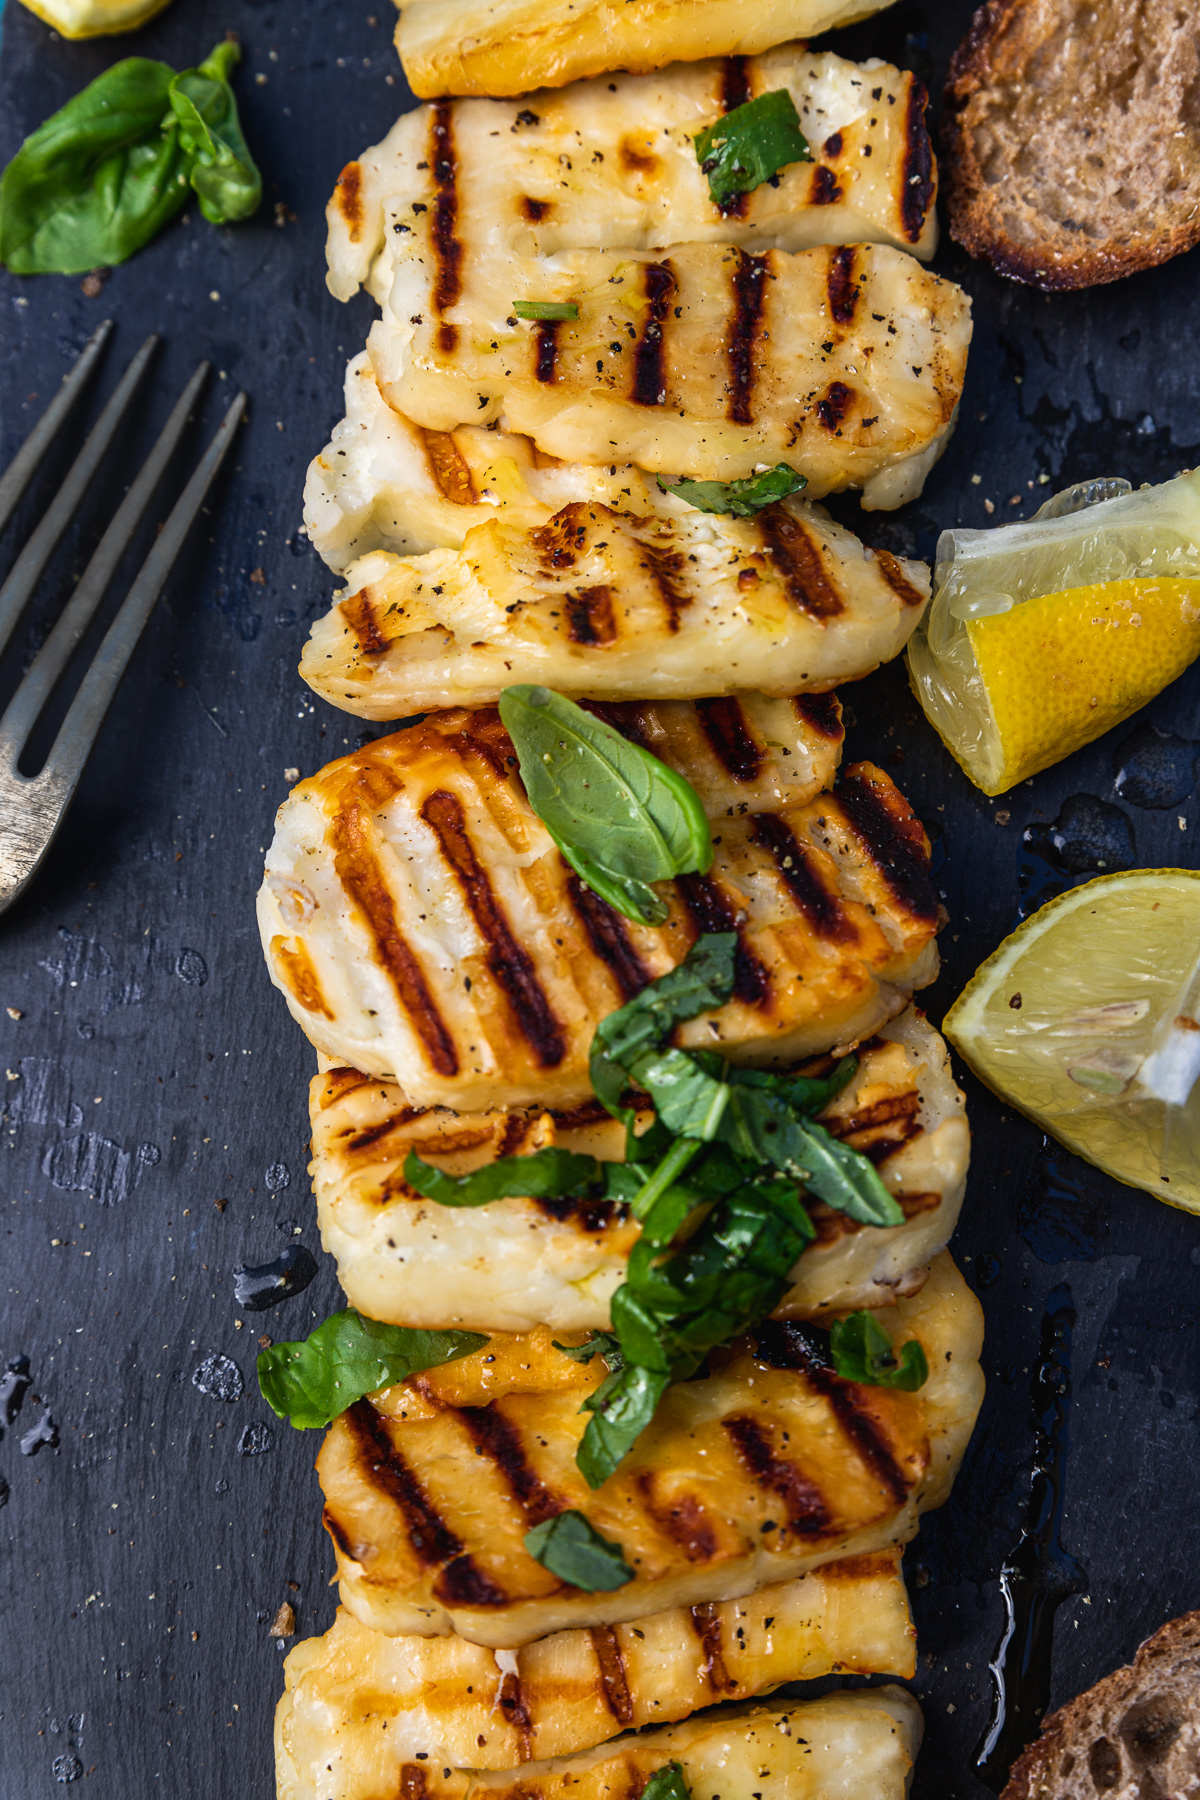 Slices of grilled halloumi on a black slate platter from above with lemon segments, basil and a fork